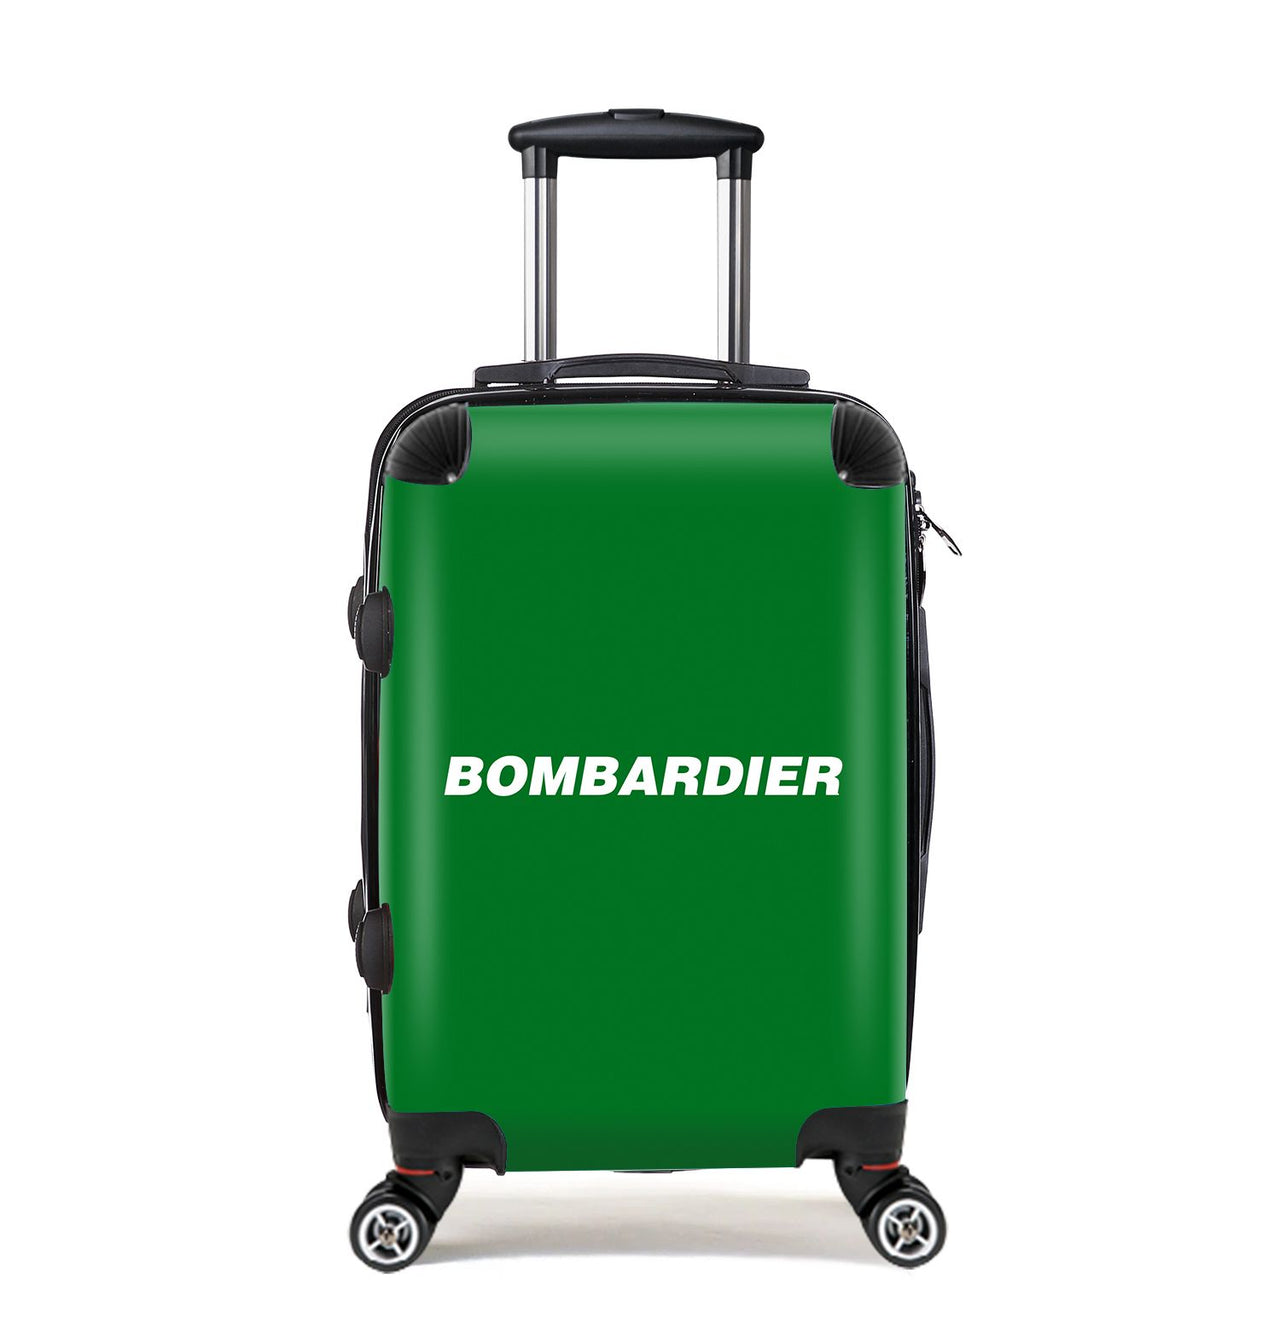 Bombardier & Text Designed Cabin Size Luggages